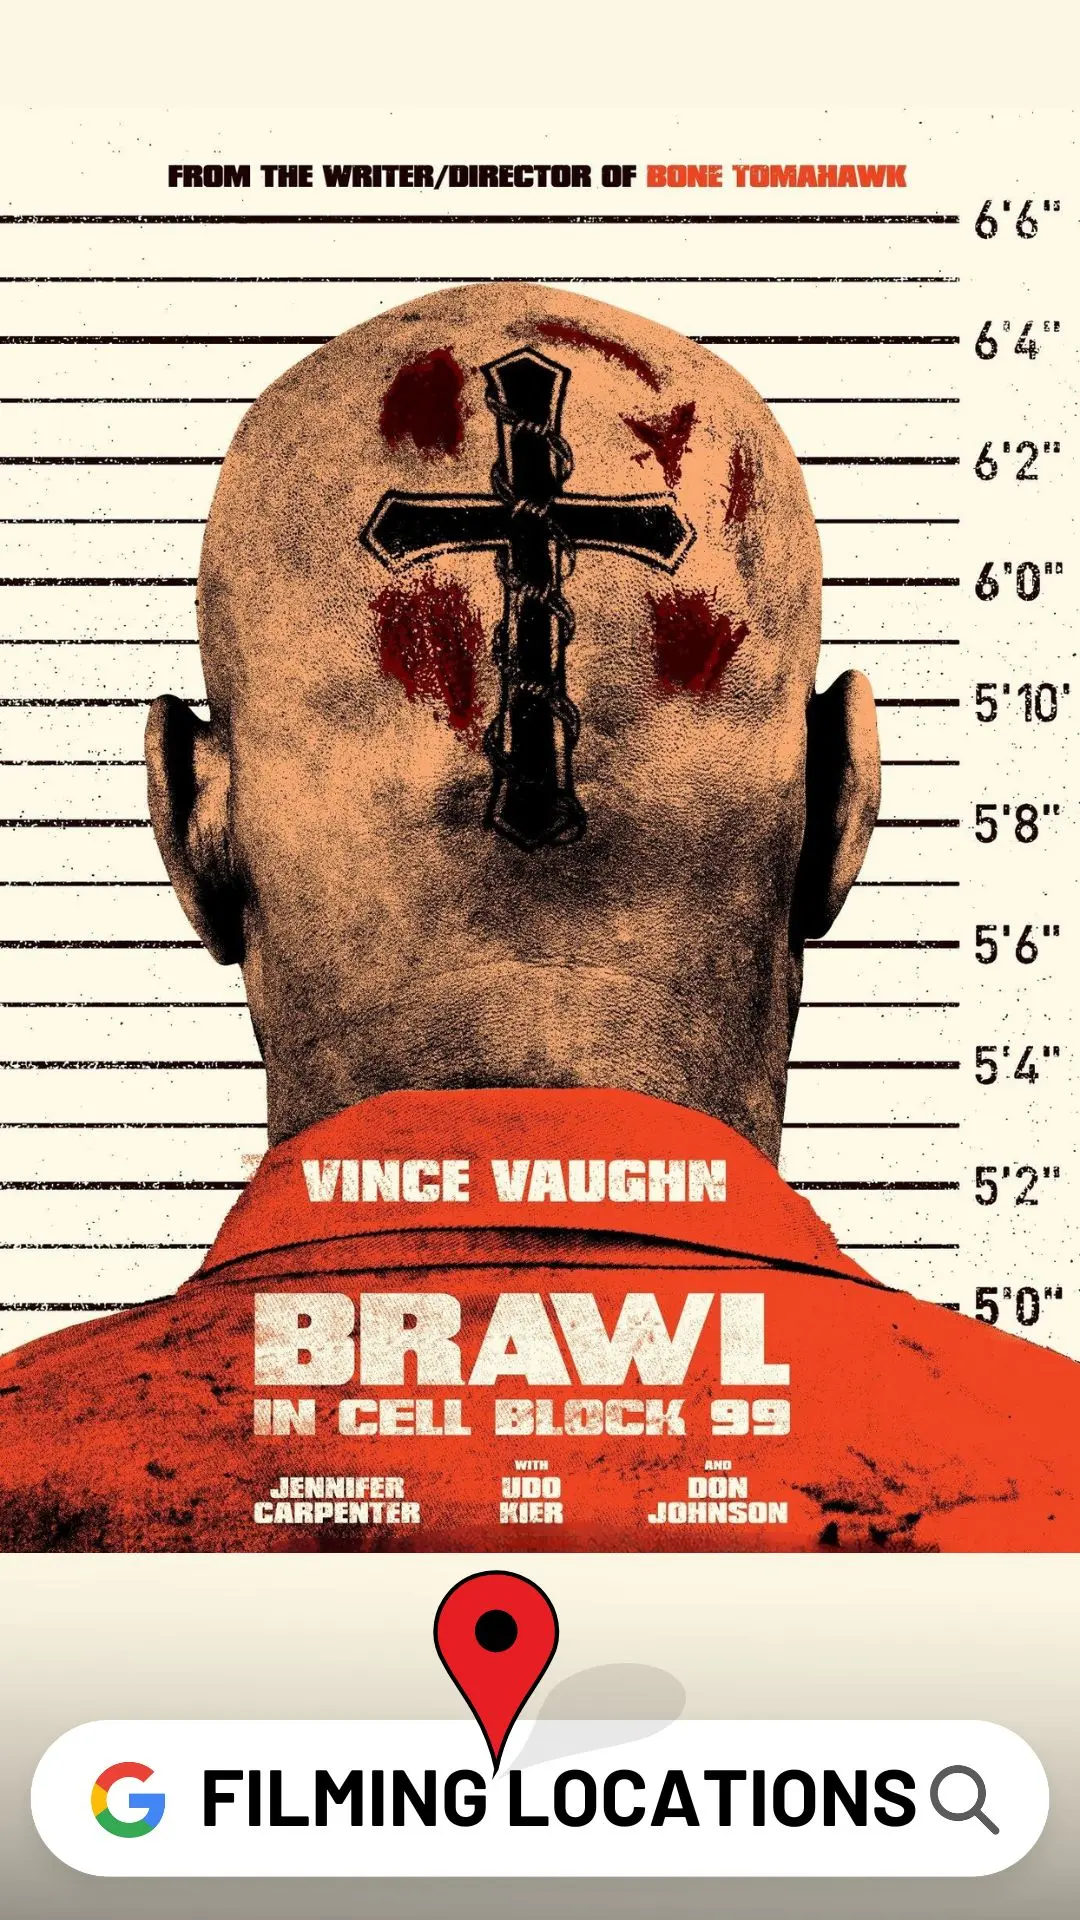 Brawl in Cell Block 99 Filming Locations